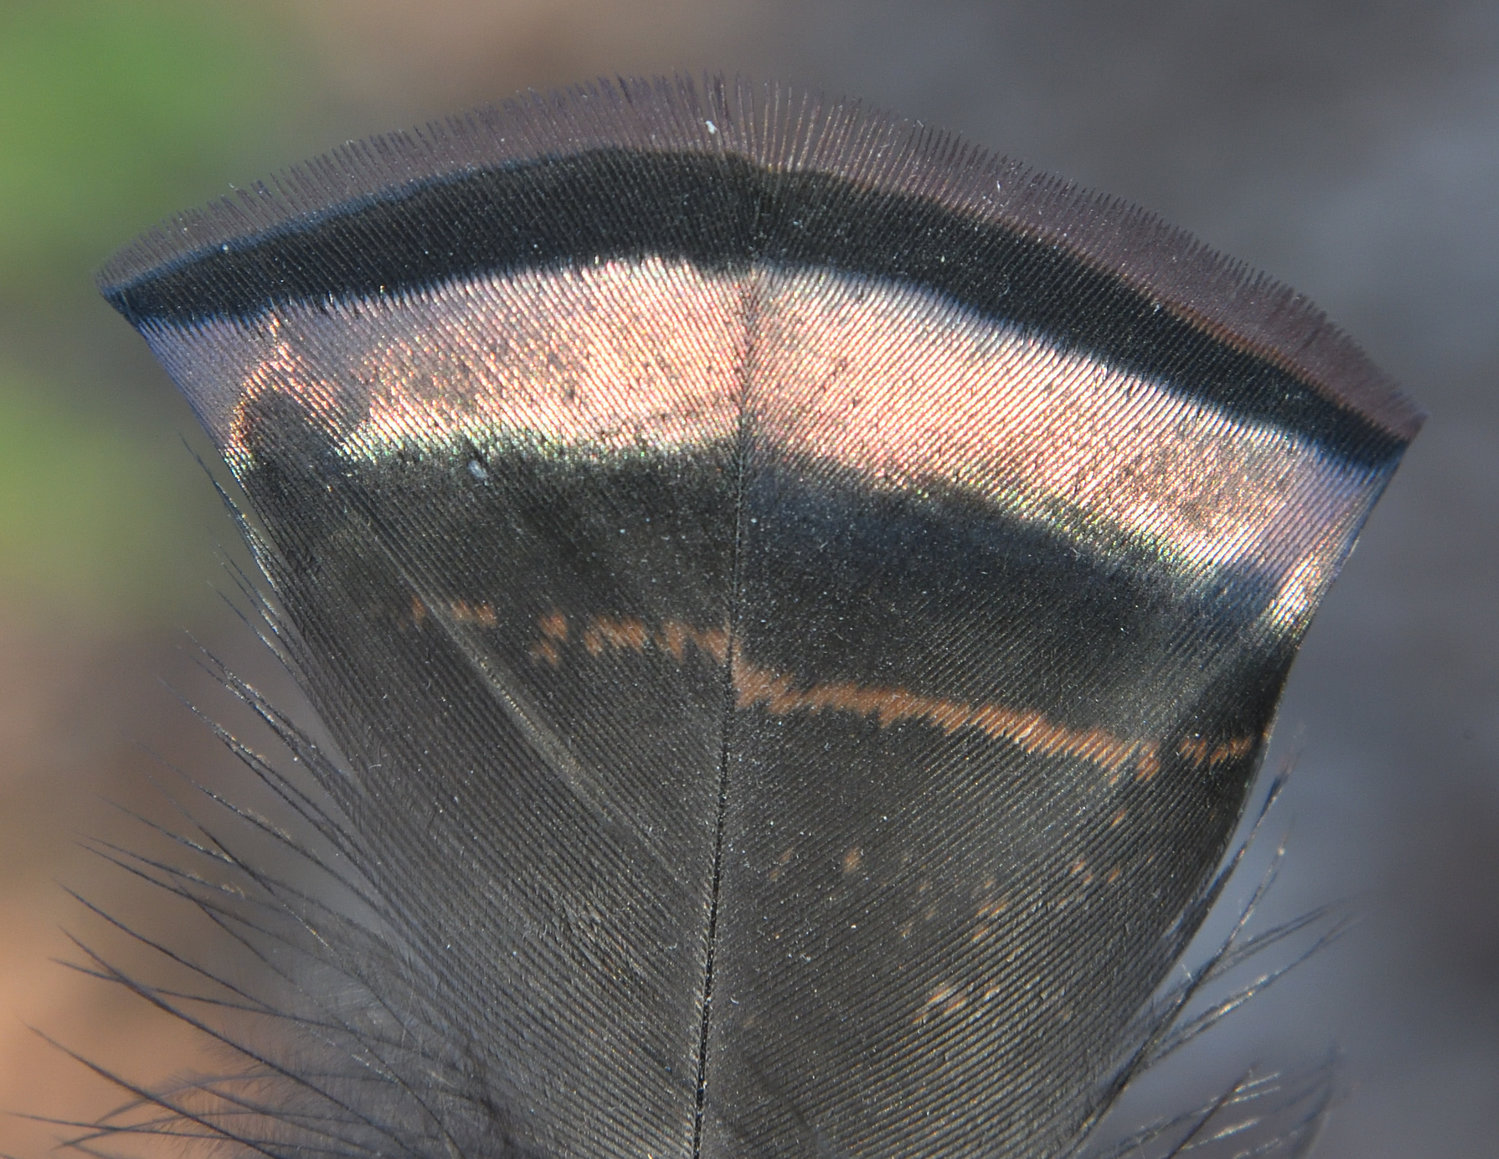 The feather, known as a “flat” because of its flat tip, has a bright bronze-colored band of iridescence near its tip. It is a contour feather from the back. The iridescent part of the feather may not be as striking on overcast days. The angle of the sun may cause the color to appear to be a different shade or vibrance. The bottom part of this feather shaft is largely down; it lies under the tips of other like contour feathers and helps provide insulation against the cold.